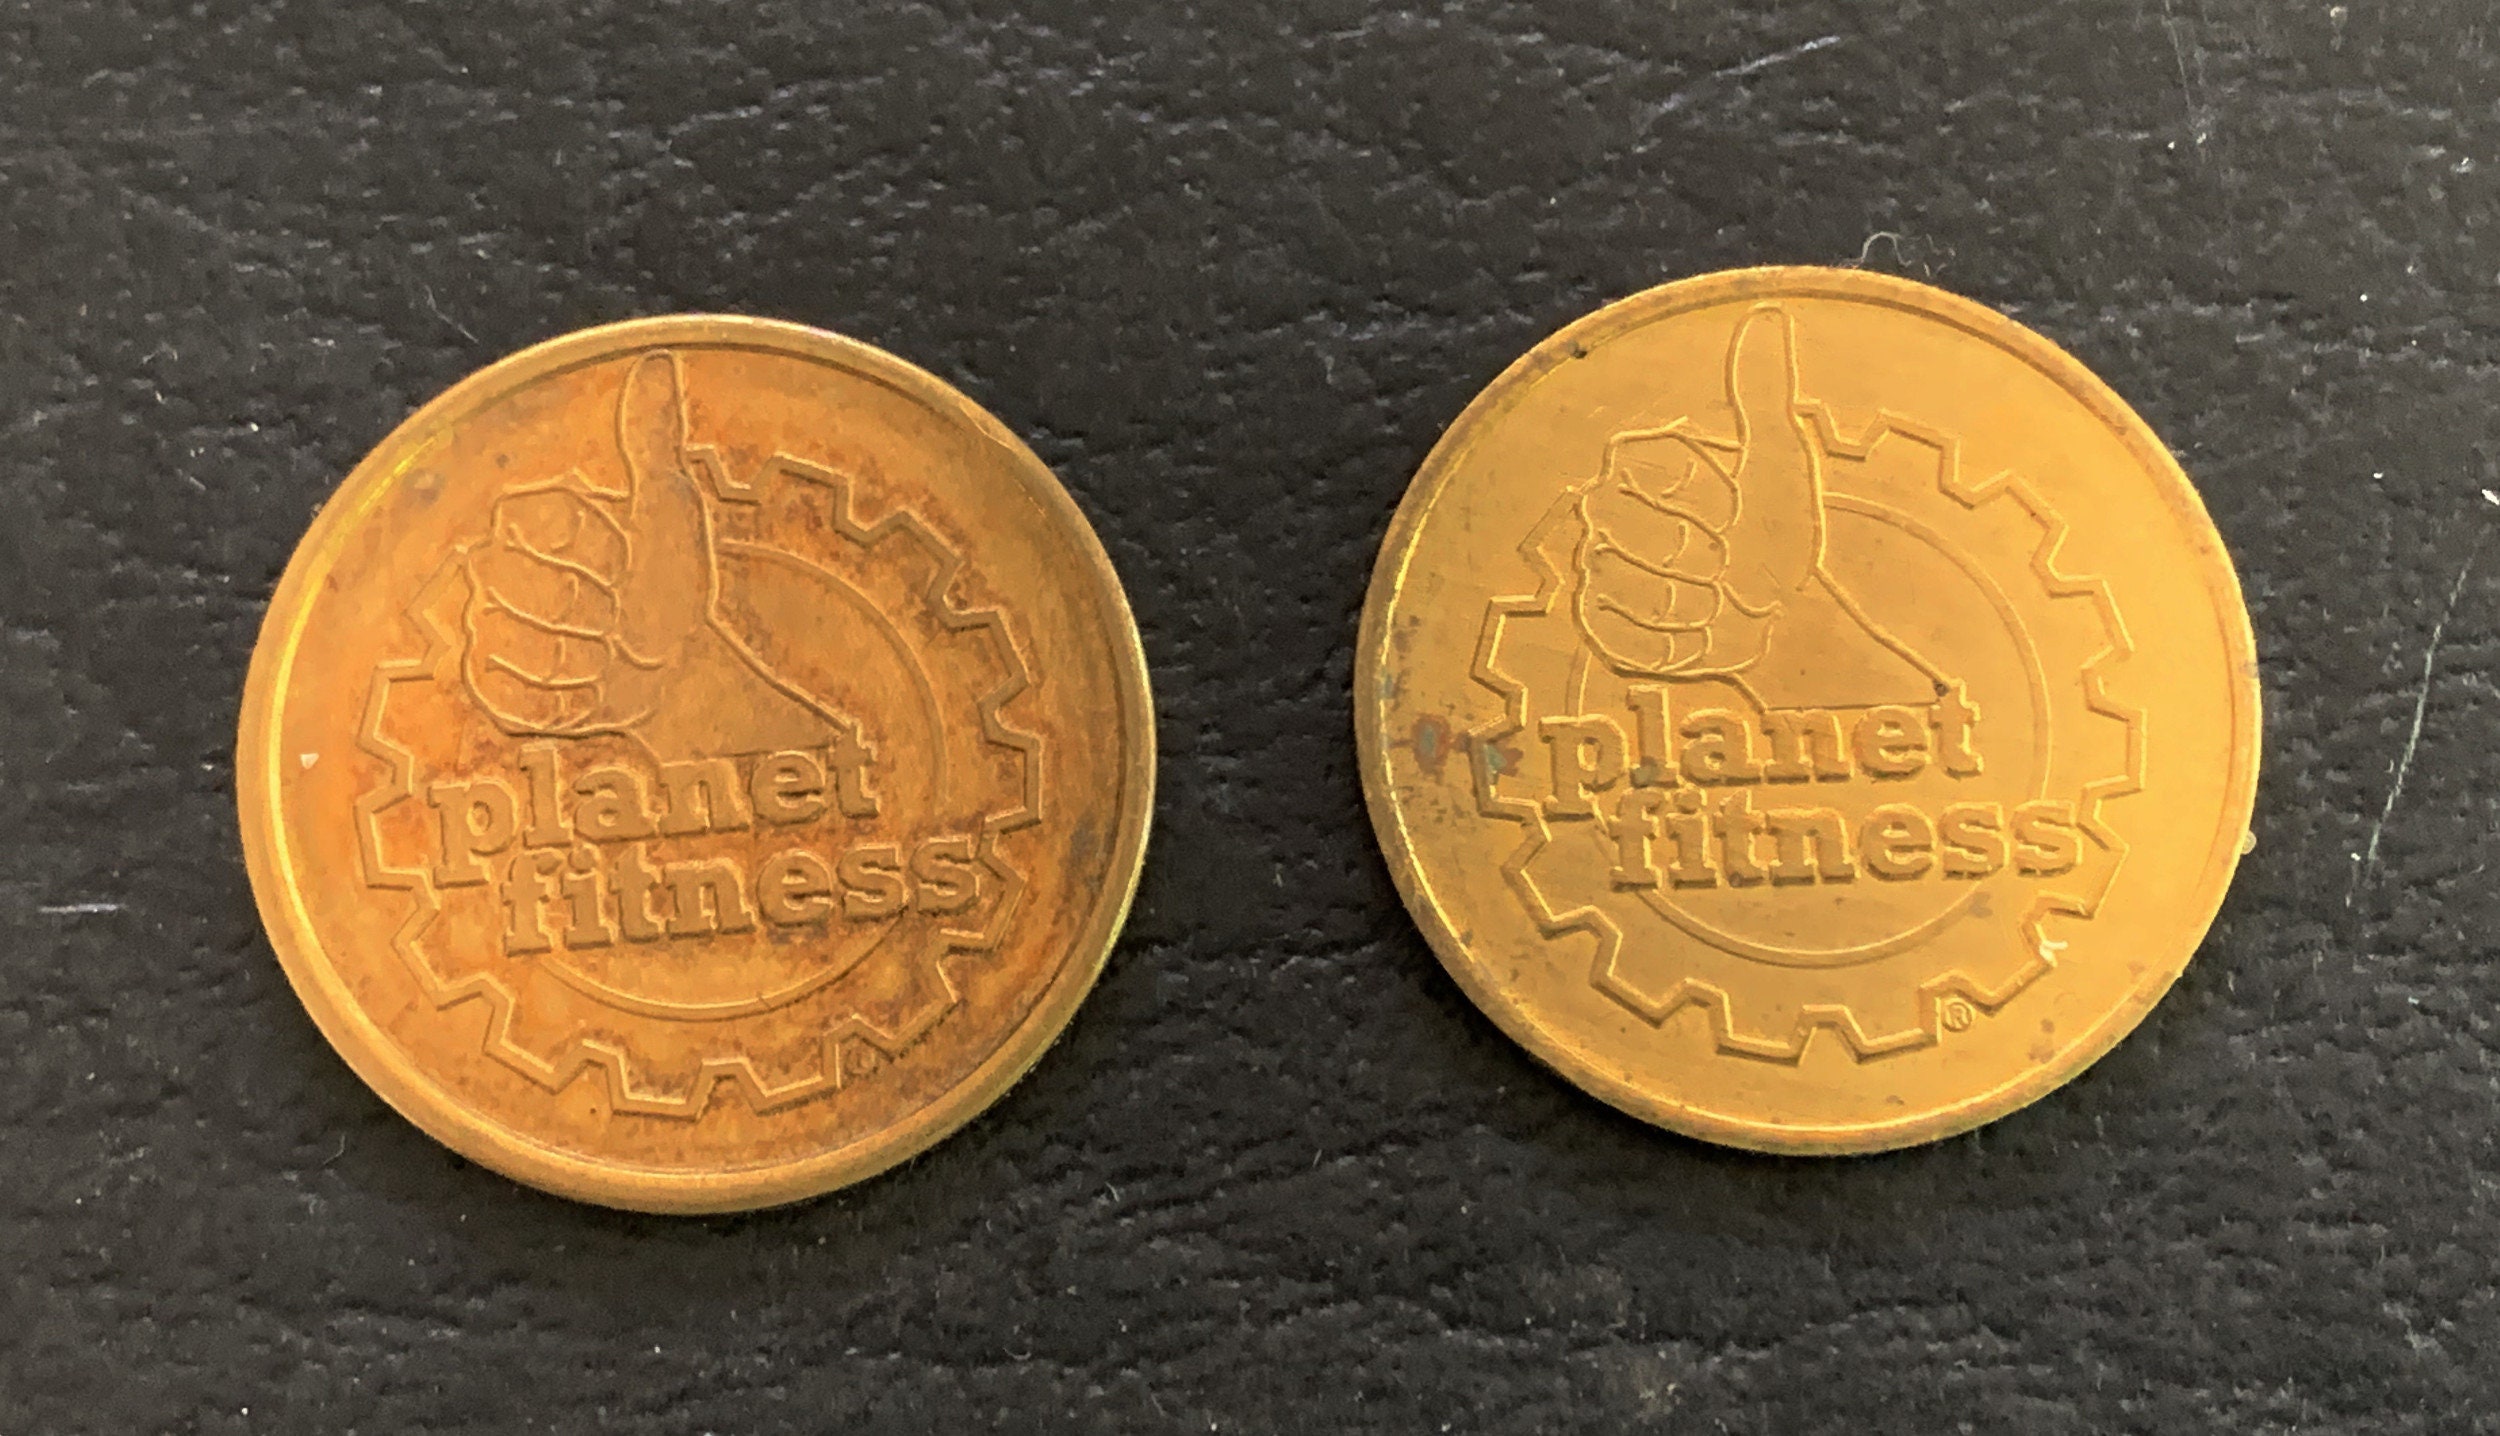 Planet Fitness Massage Coins Two Tokens Good for One Visit Each